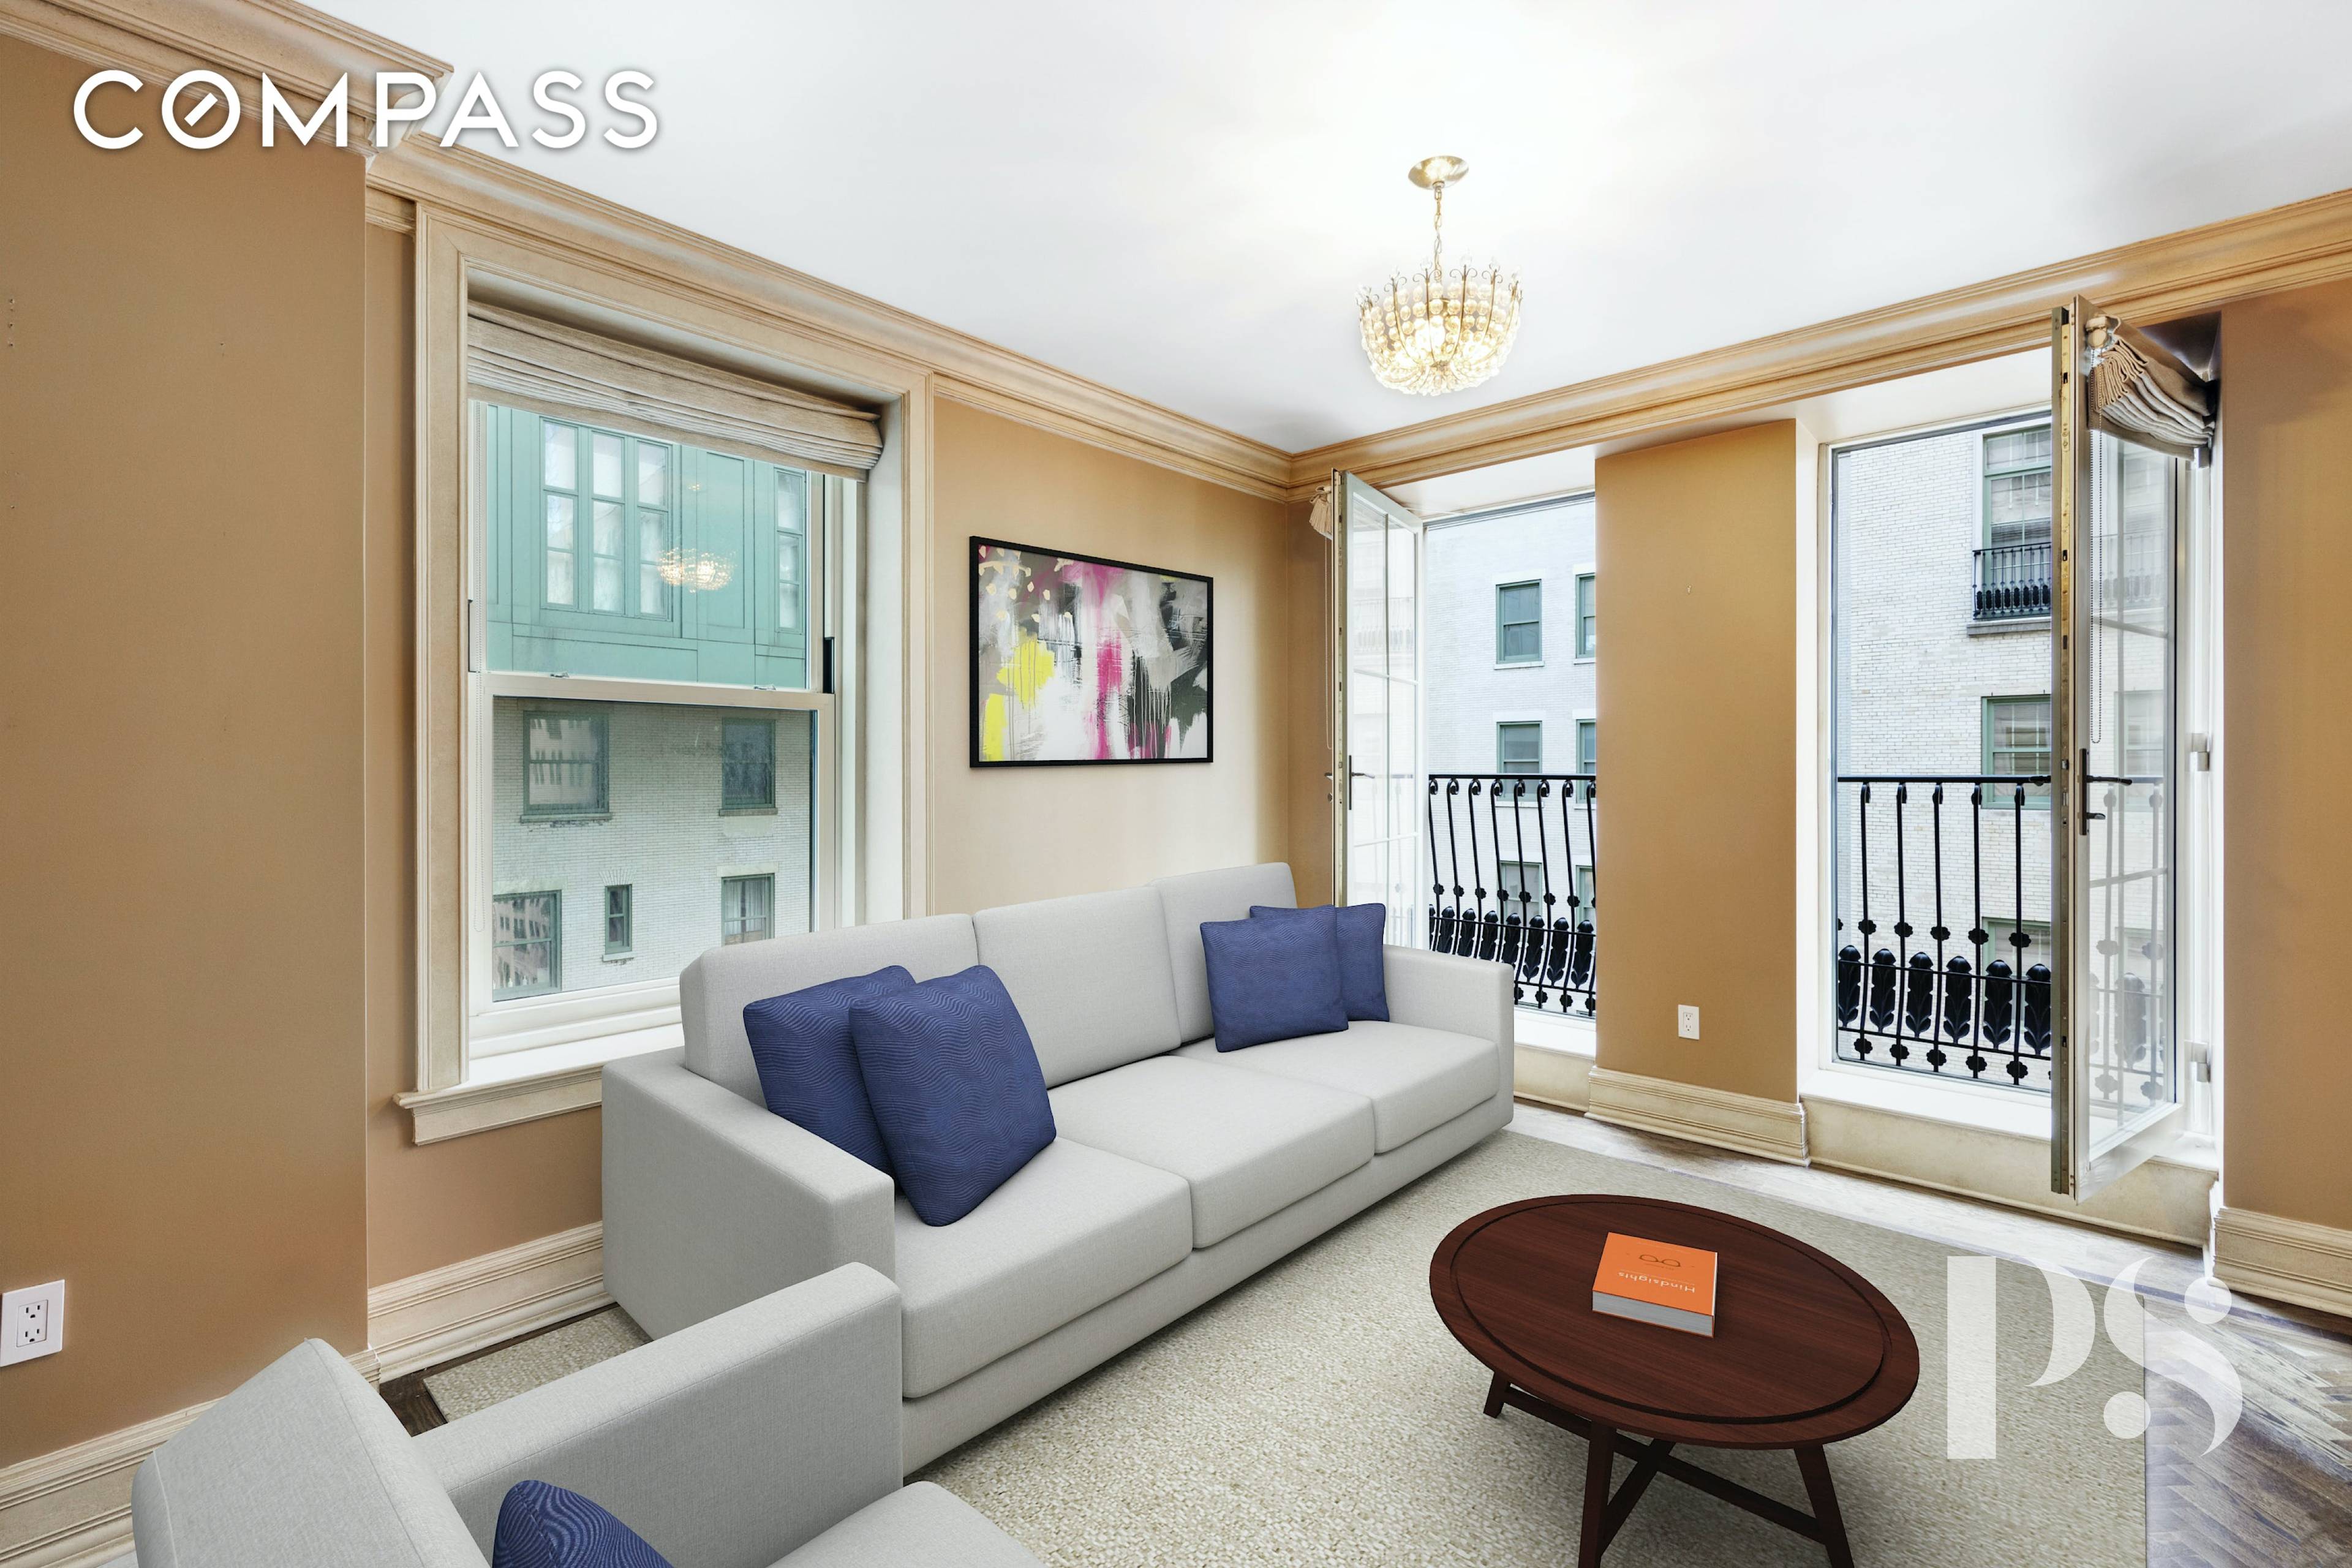 As soon as you enter The Plaza Private Residences, you leave the vibrancy of NYC and are on your way to the chic Parisian 1 bedroom apartment.